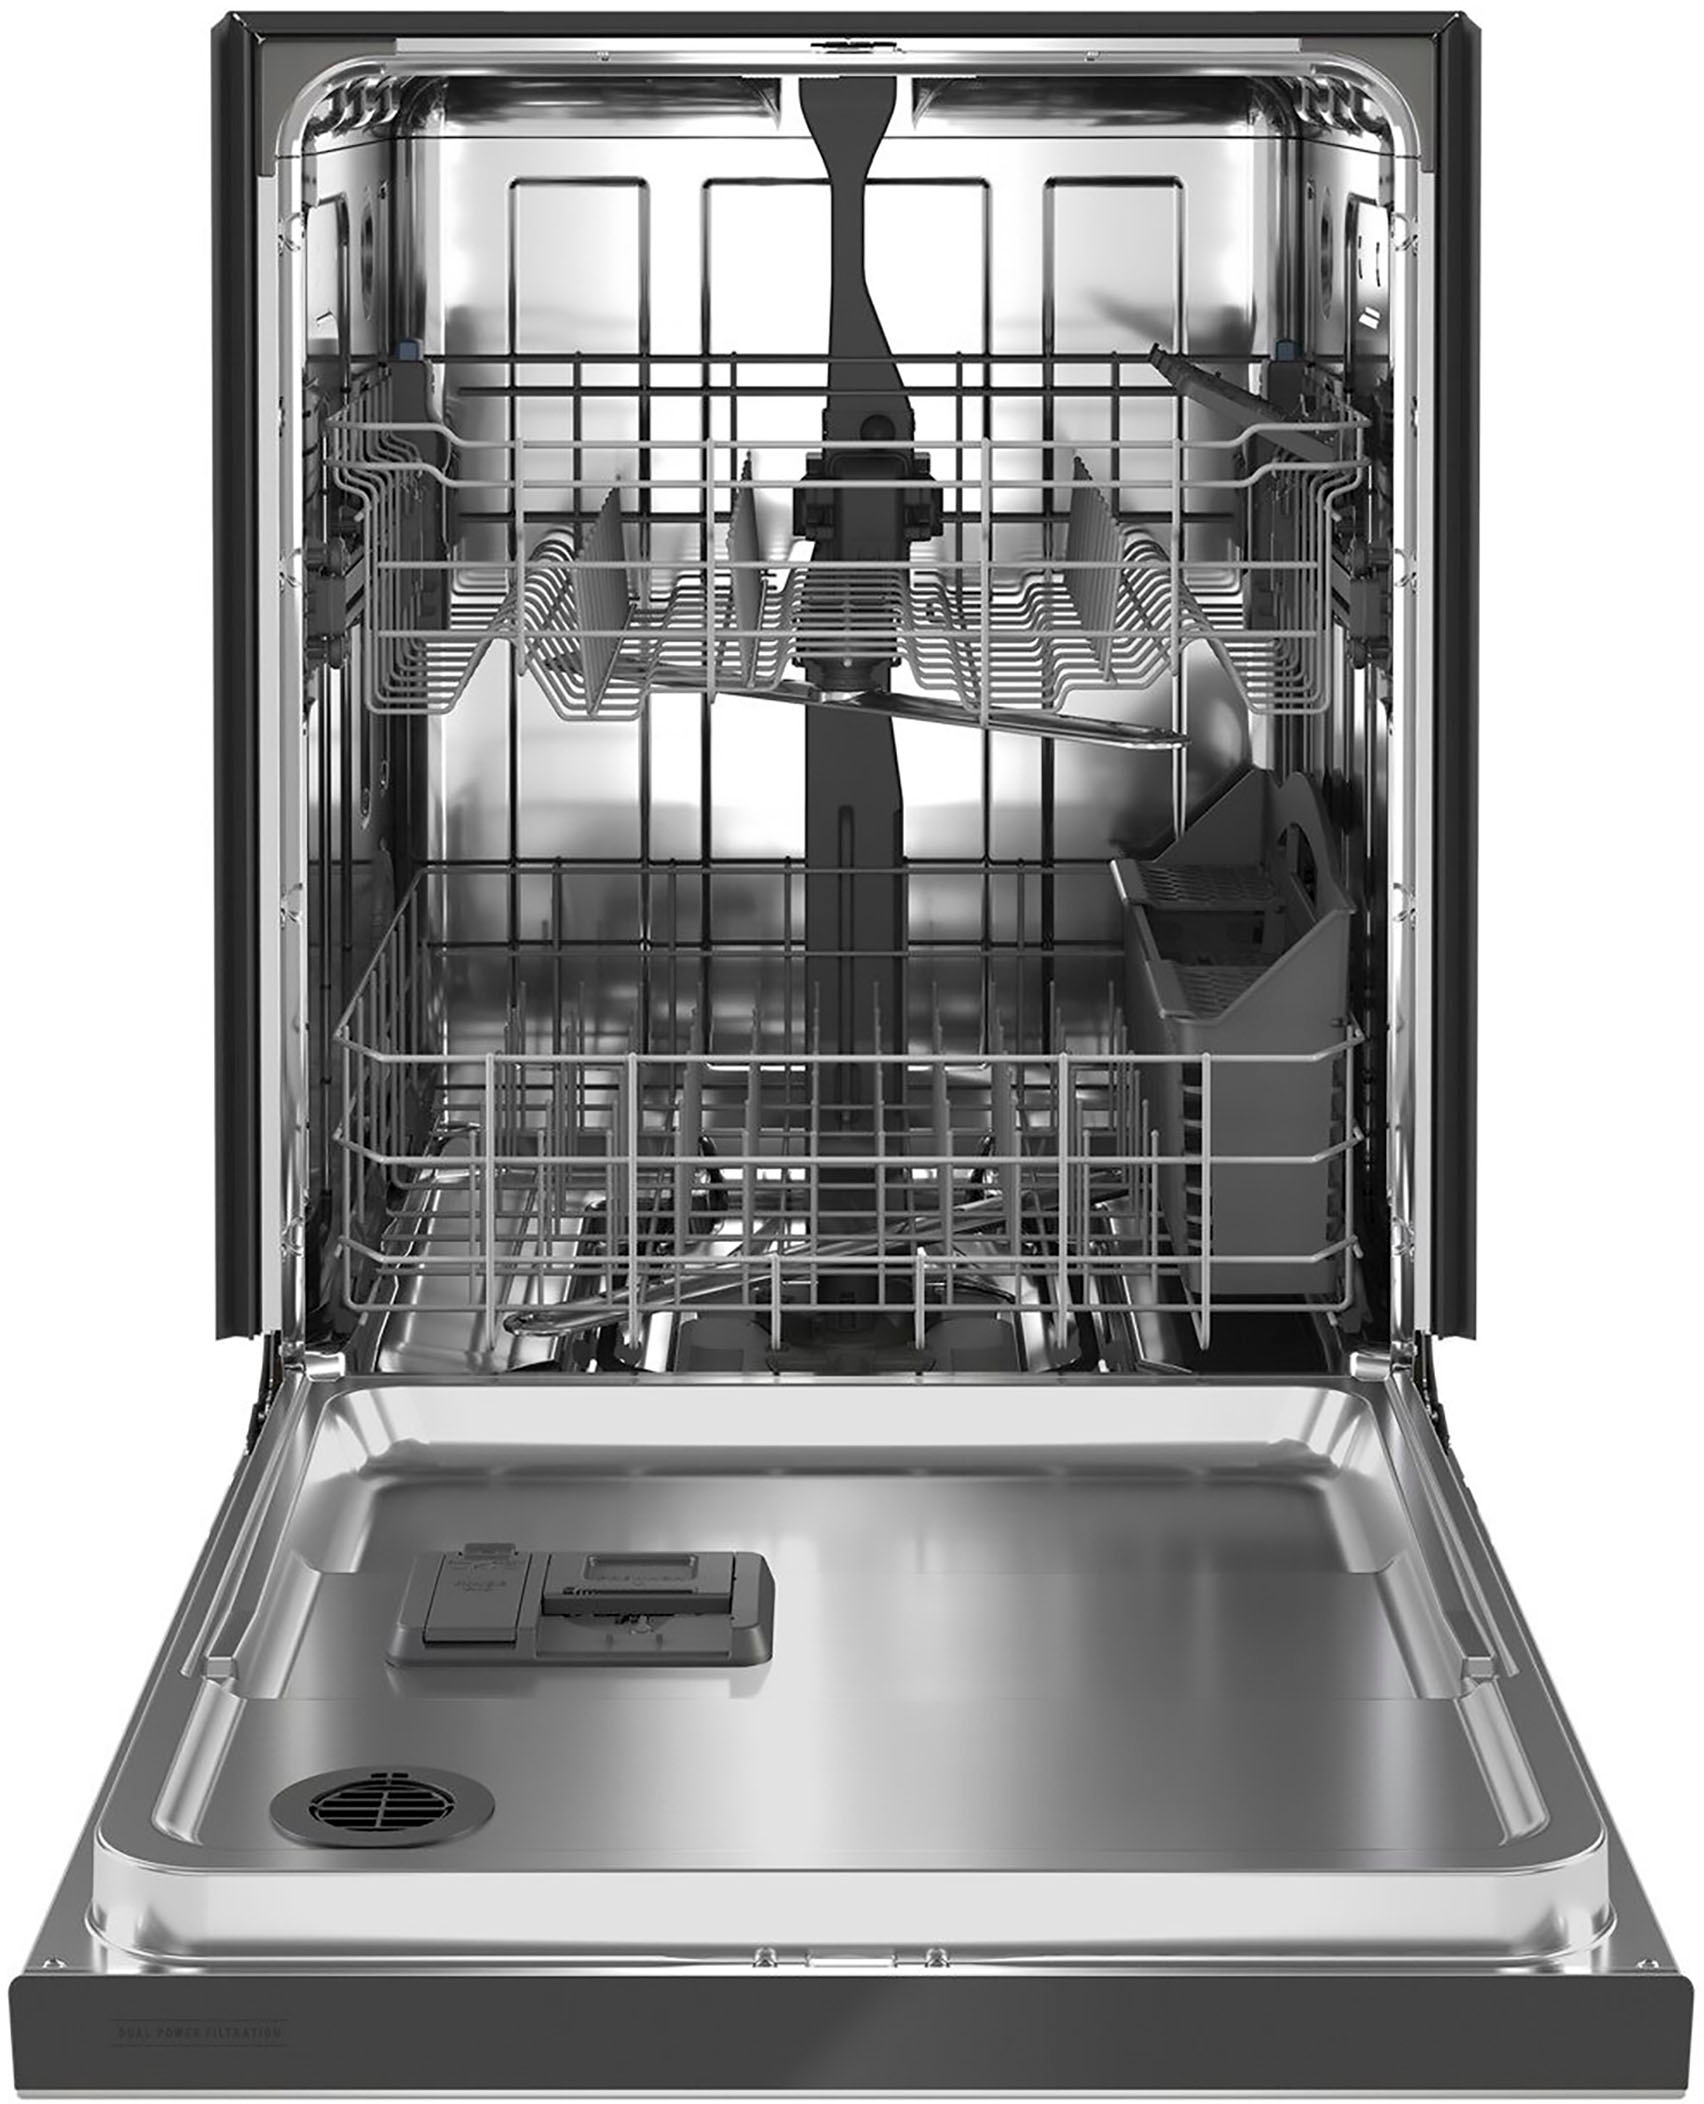 Maytag 24" Front Control Built-In Dishwasher with Stainless Steel Tub